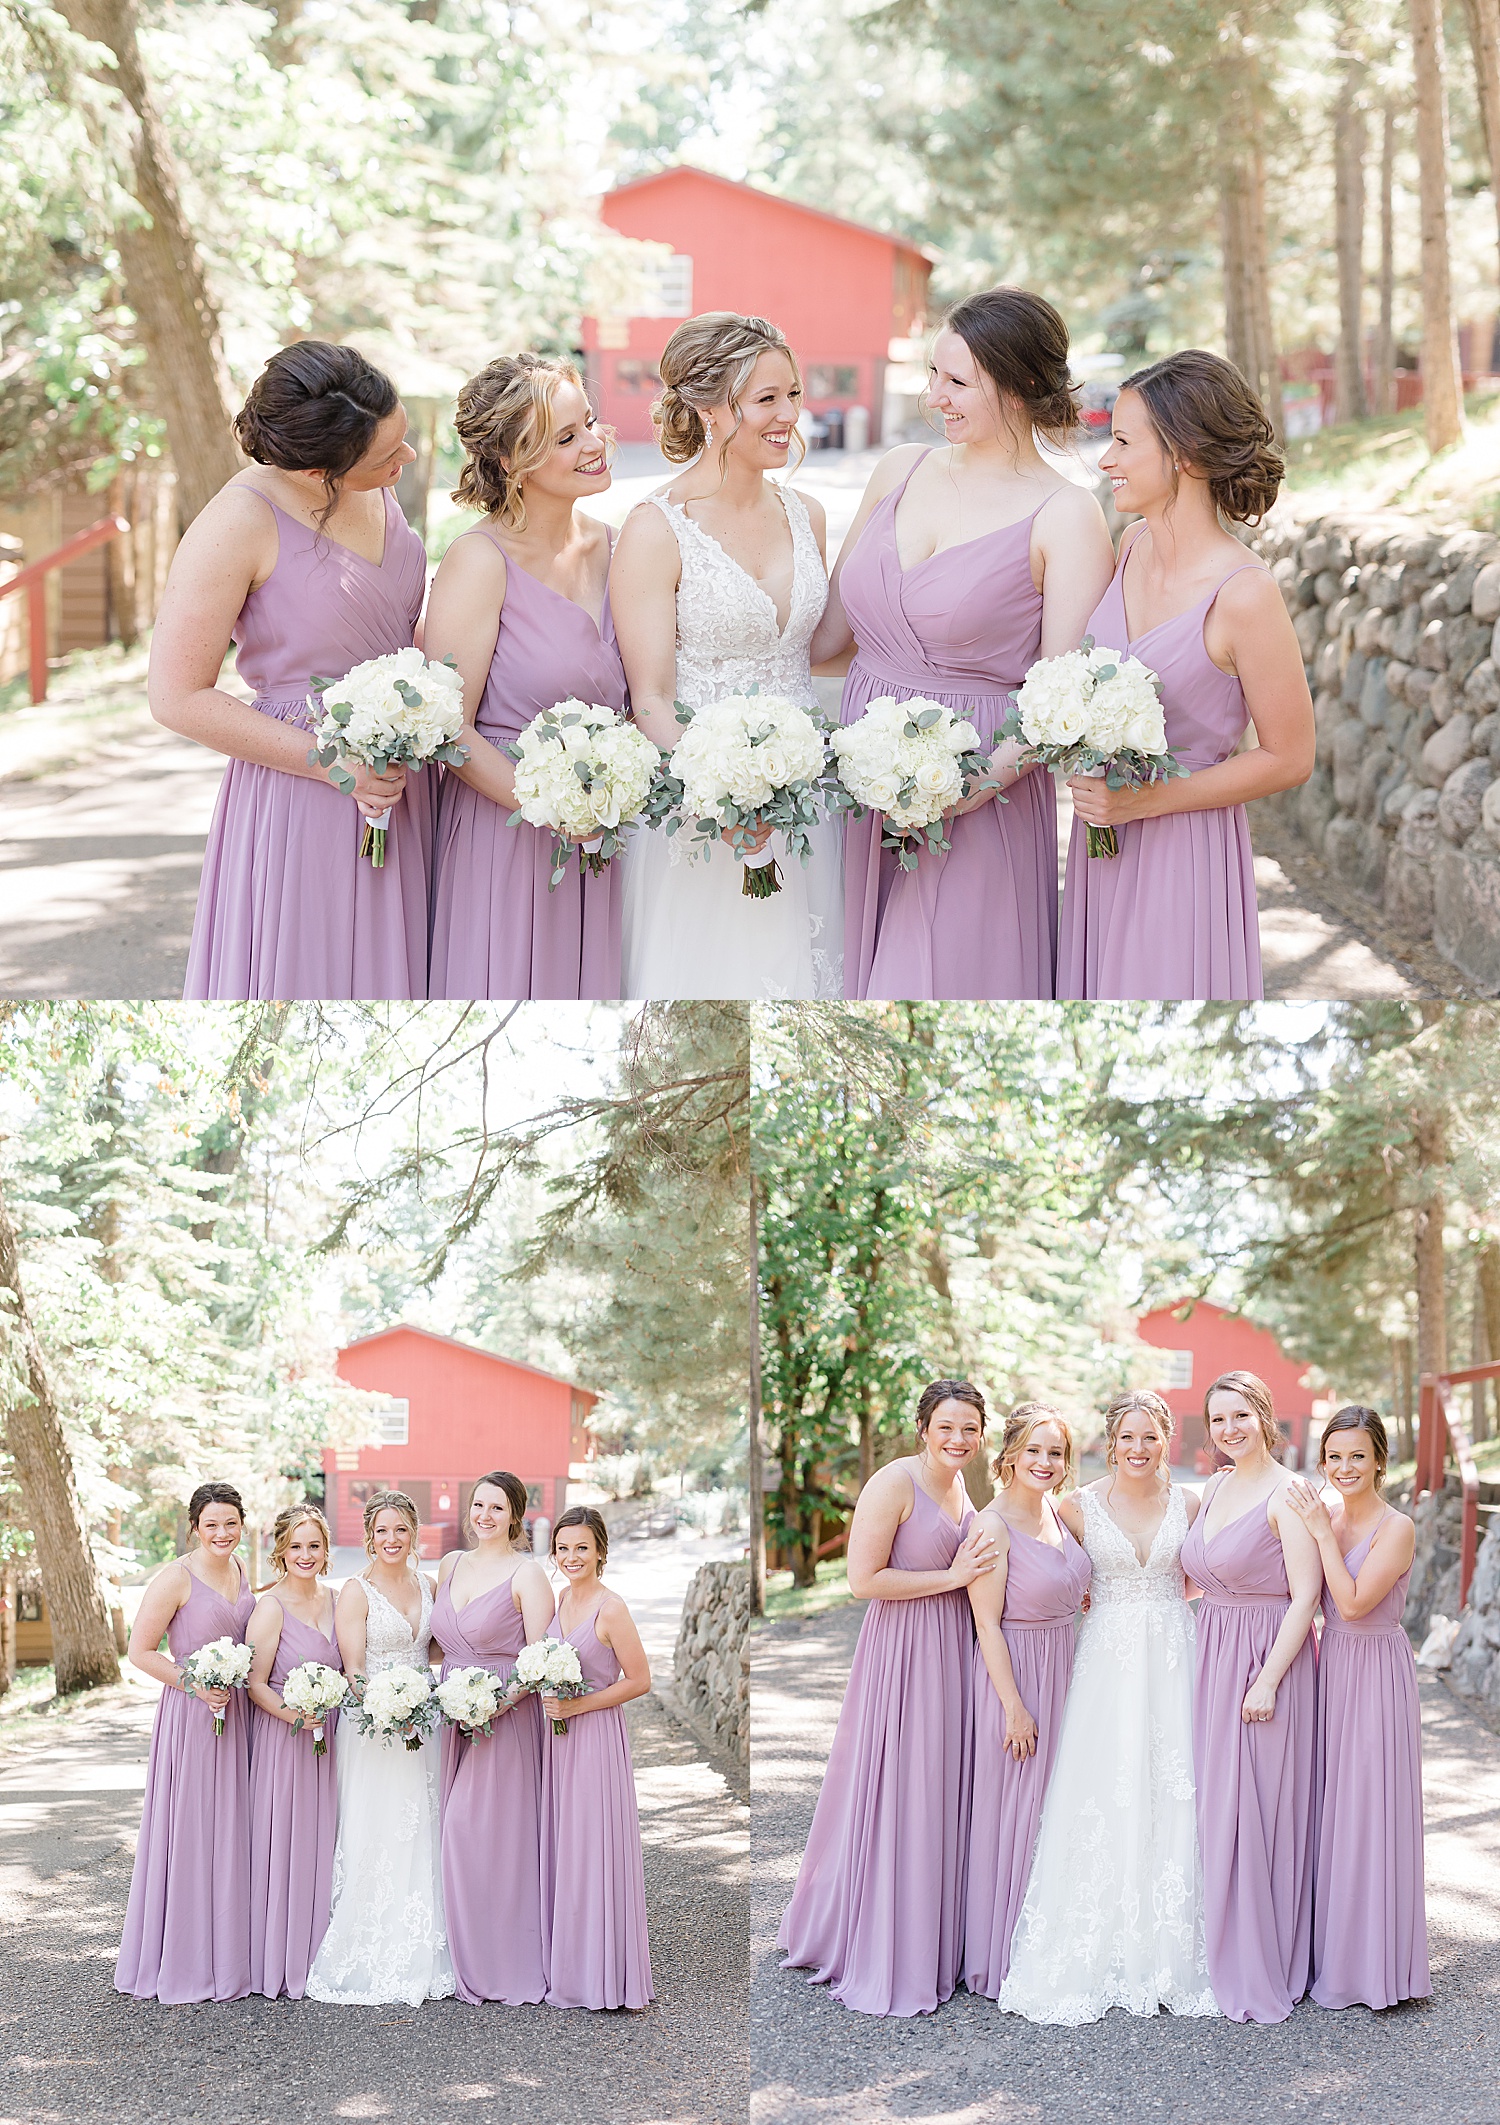 bride and bridesmaids wearing purple dresses holding white rose wedding bouquets